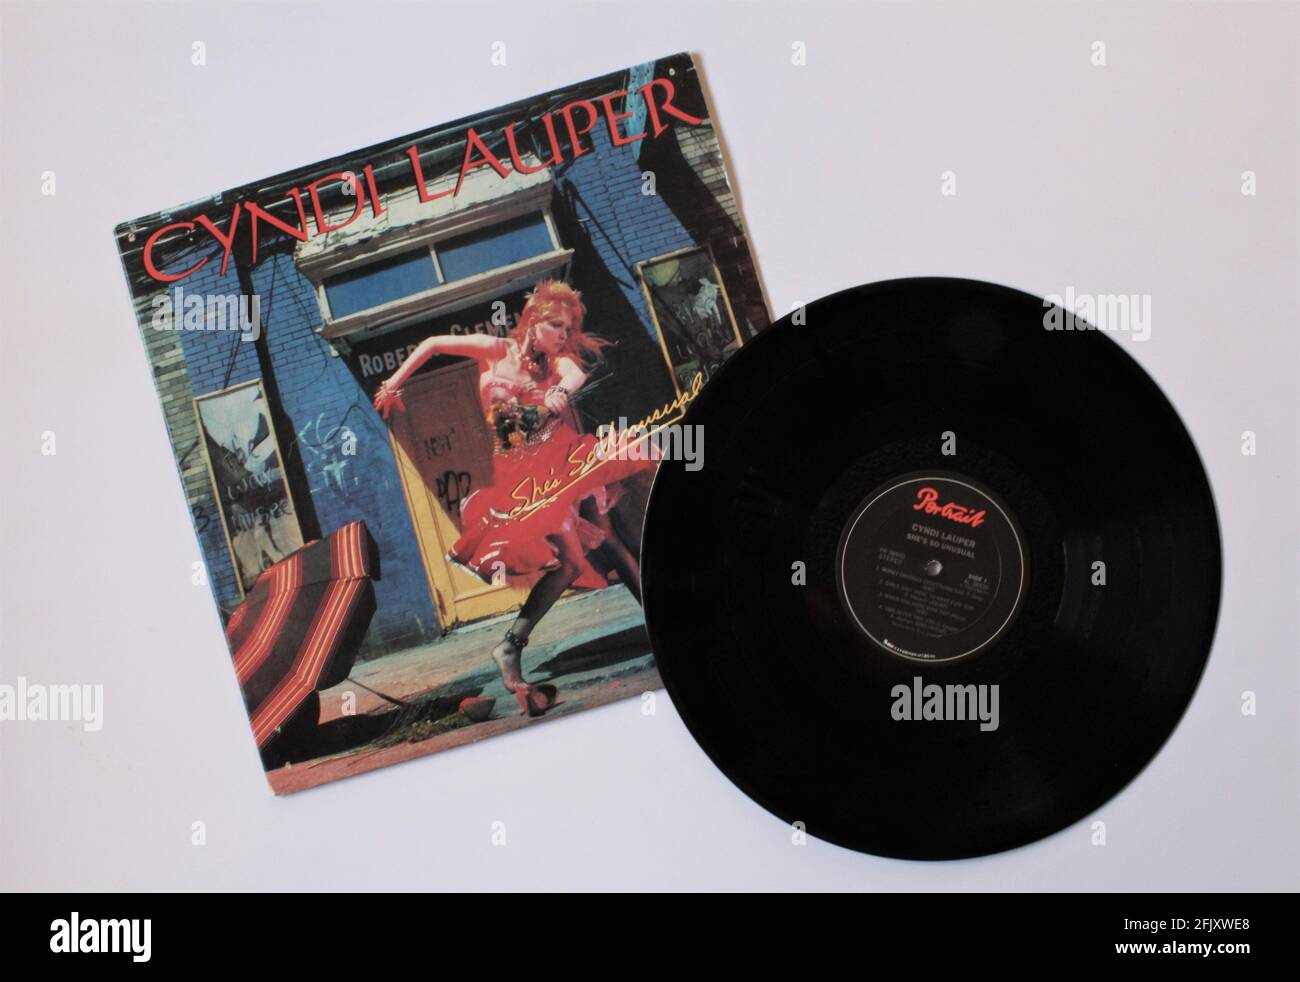 Pop and new wave artist, Cyndi Lauper music album on vinyl record LP disc. Titled: She's So Unusual Stock Photo